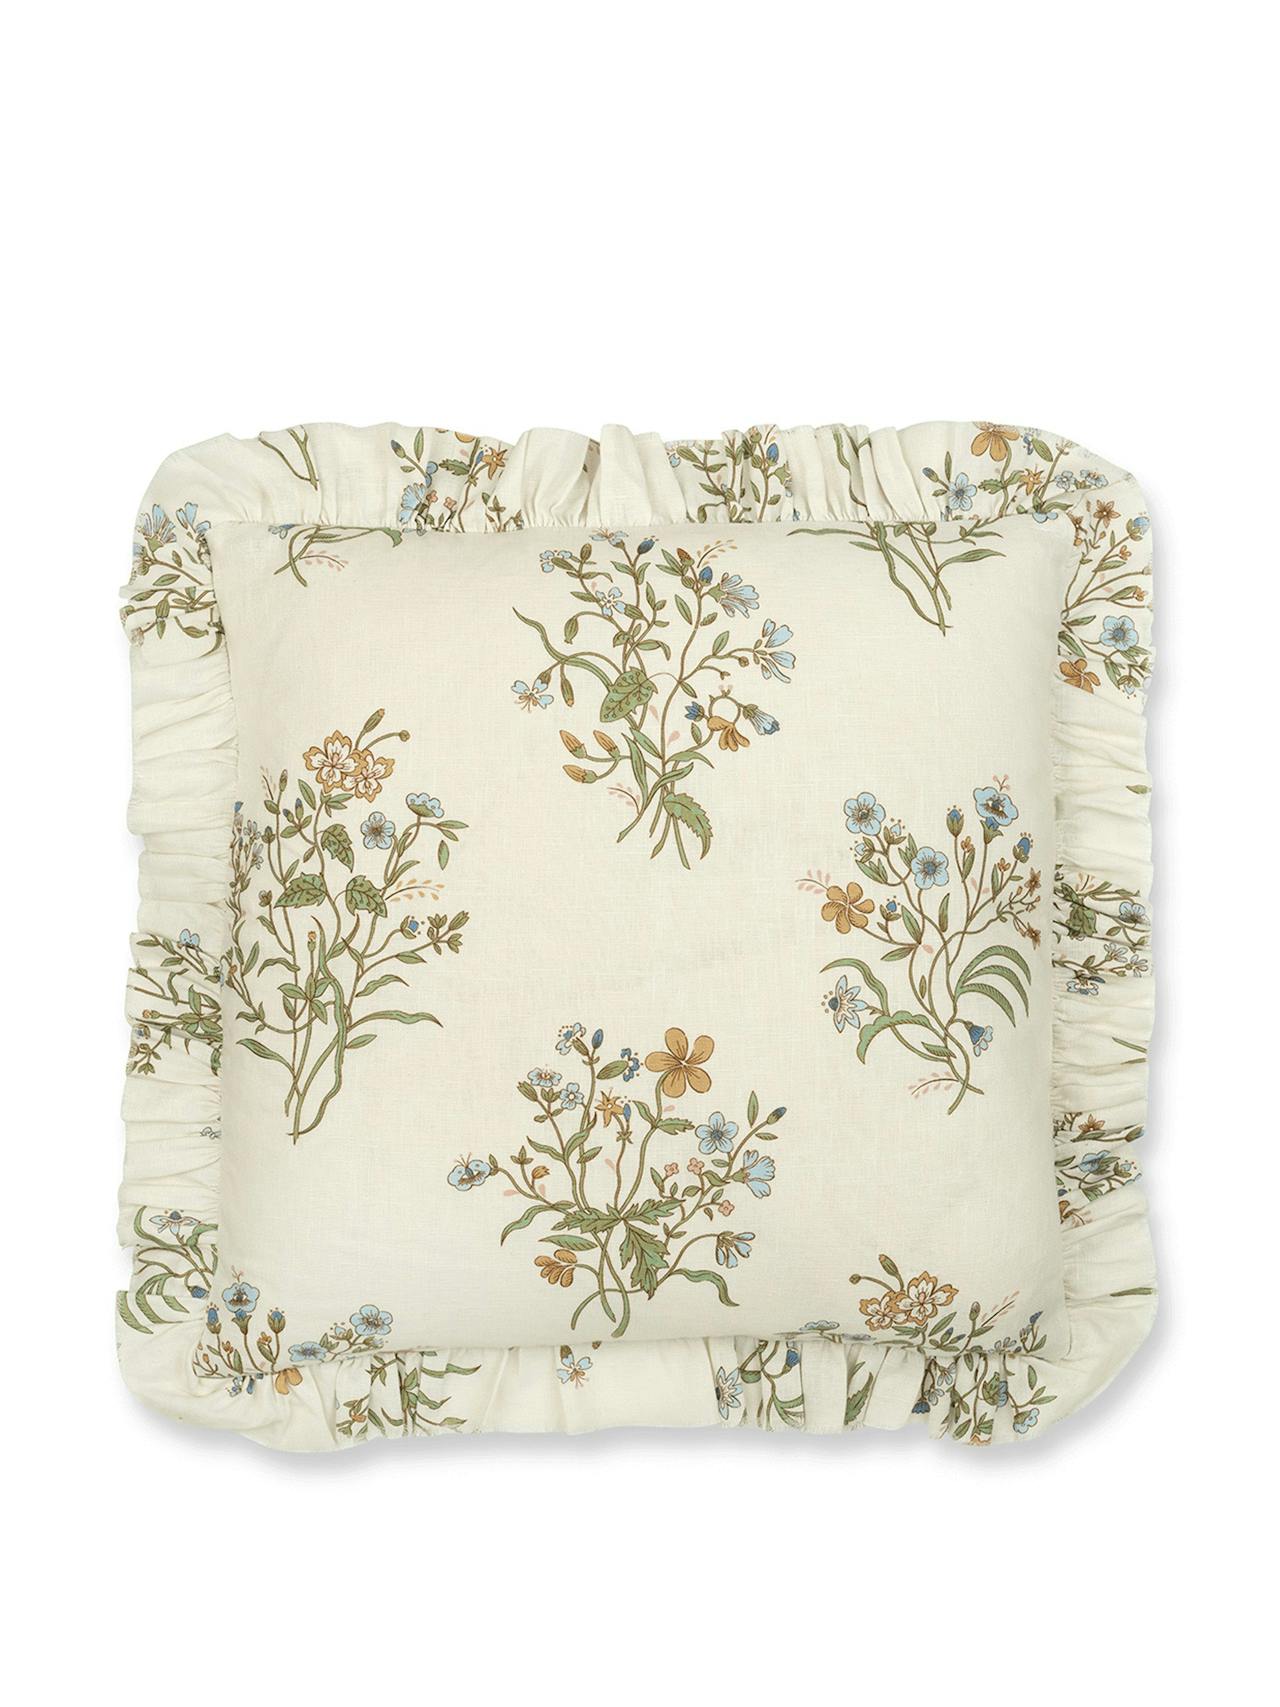 Flax and field flower print cushion with frill